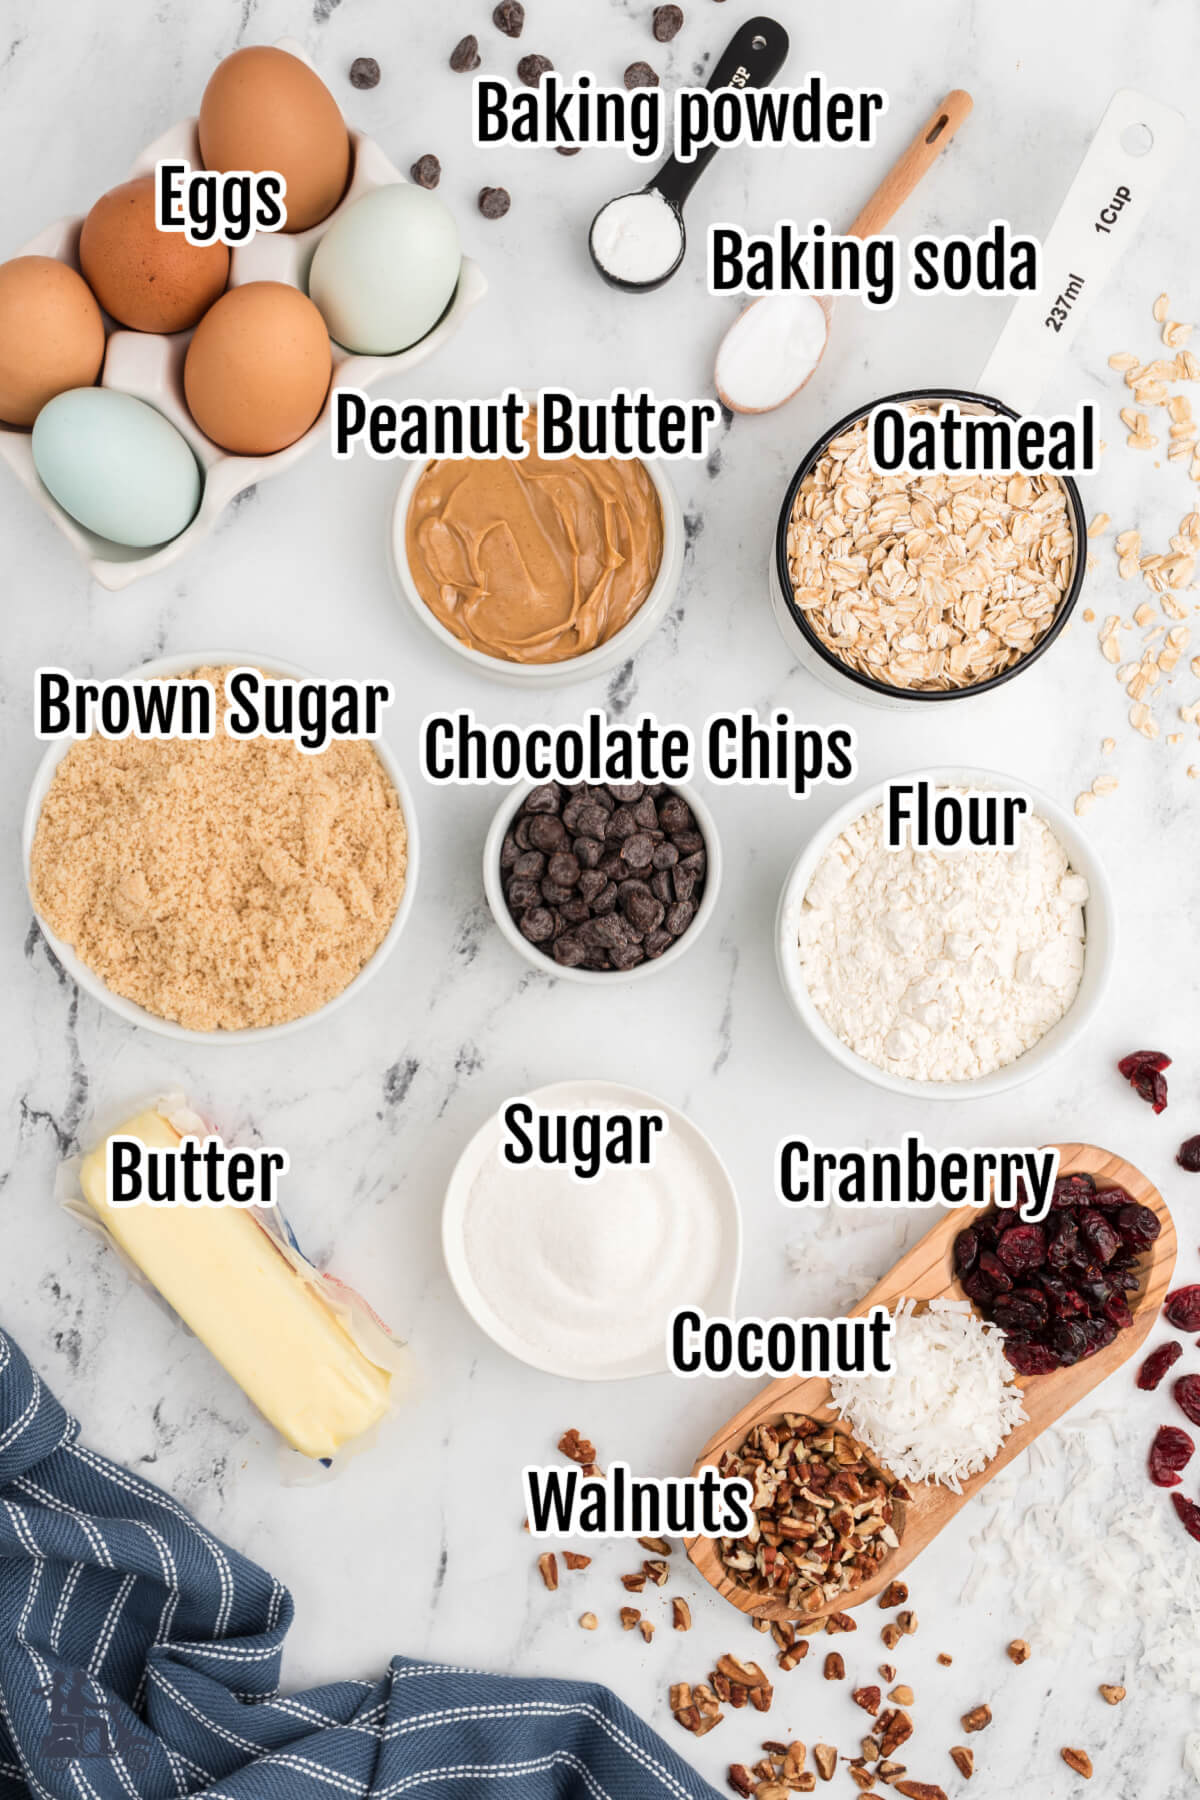 Image of the ingredients used in the 10-cup cookies.